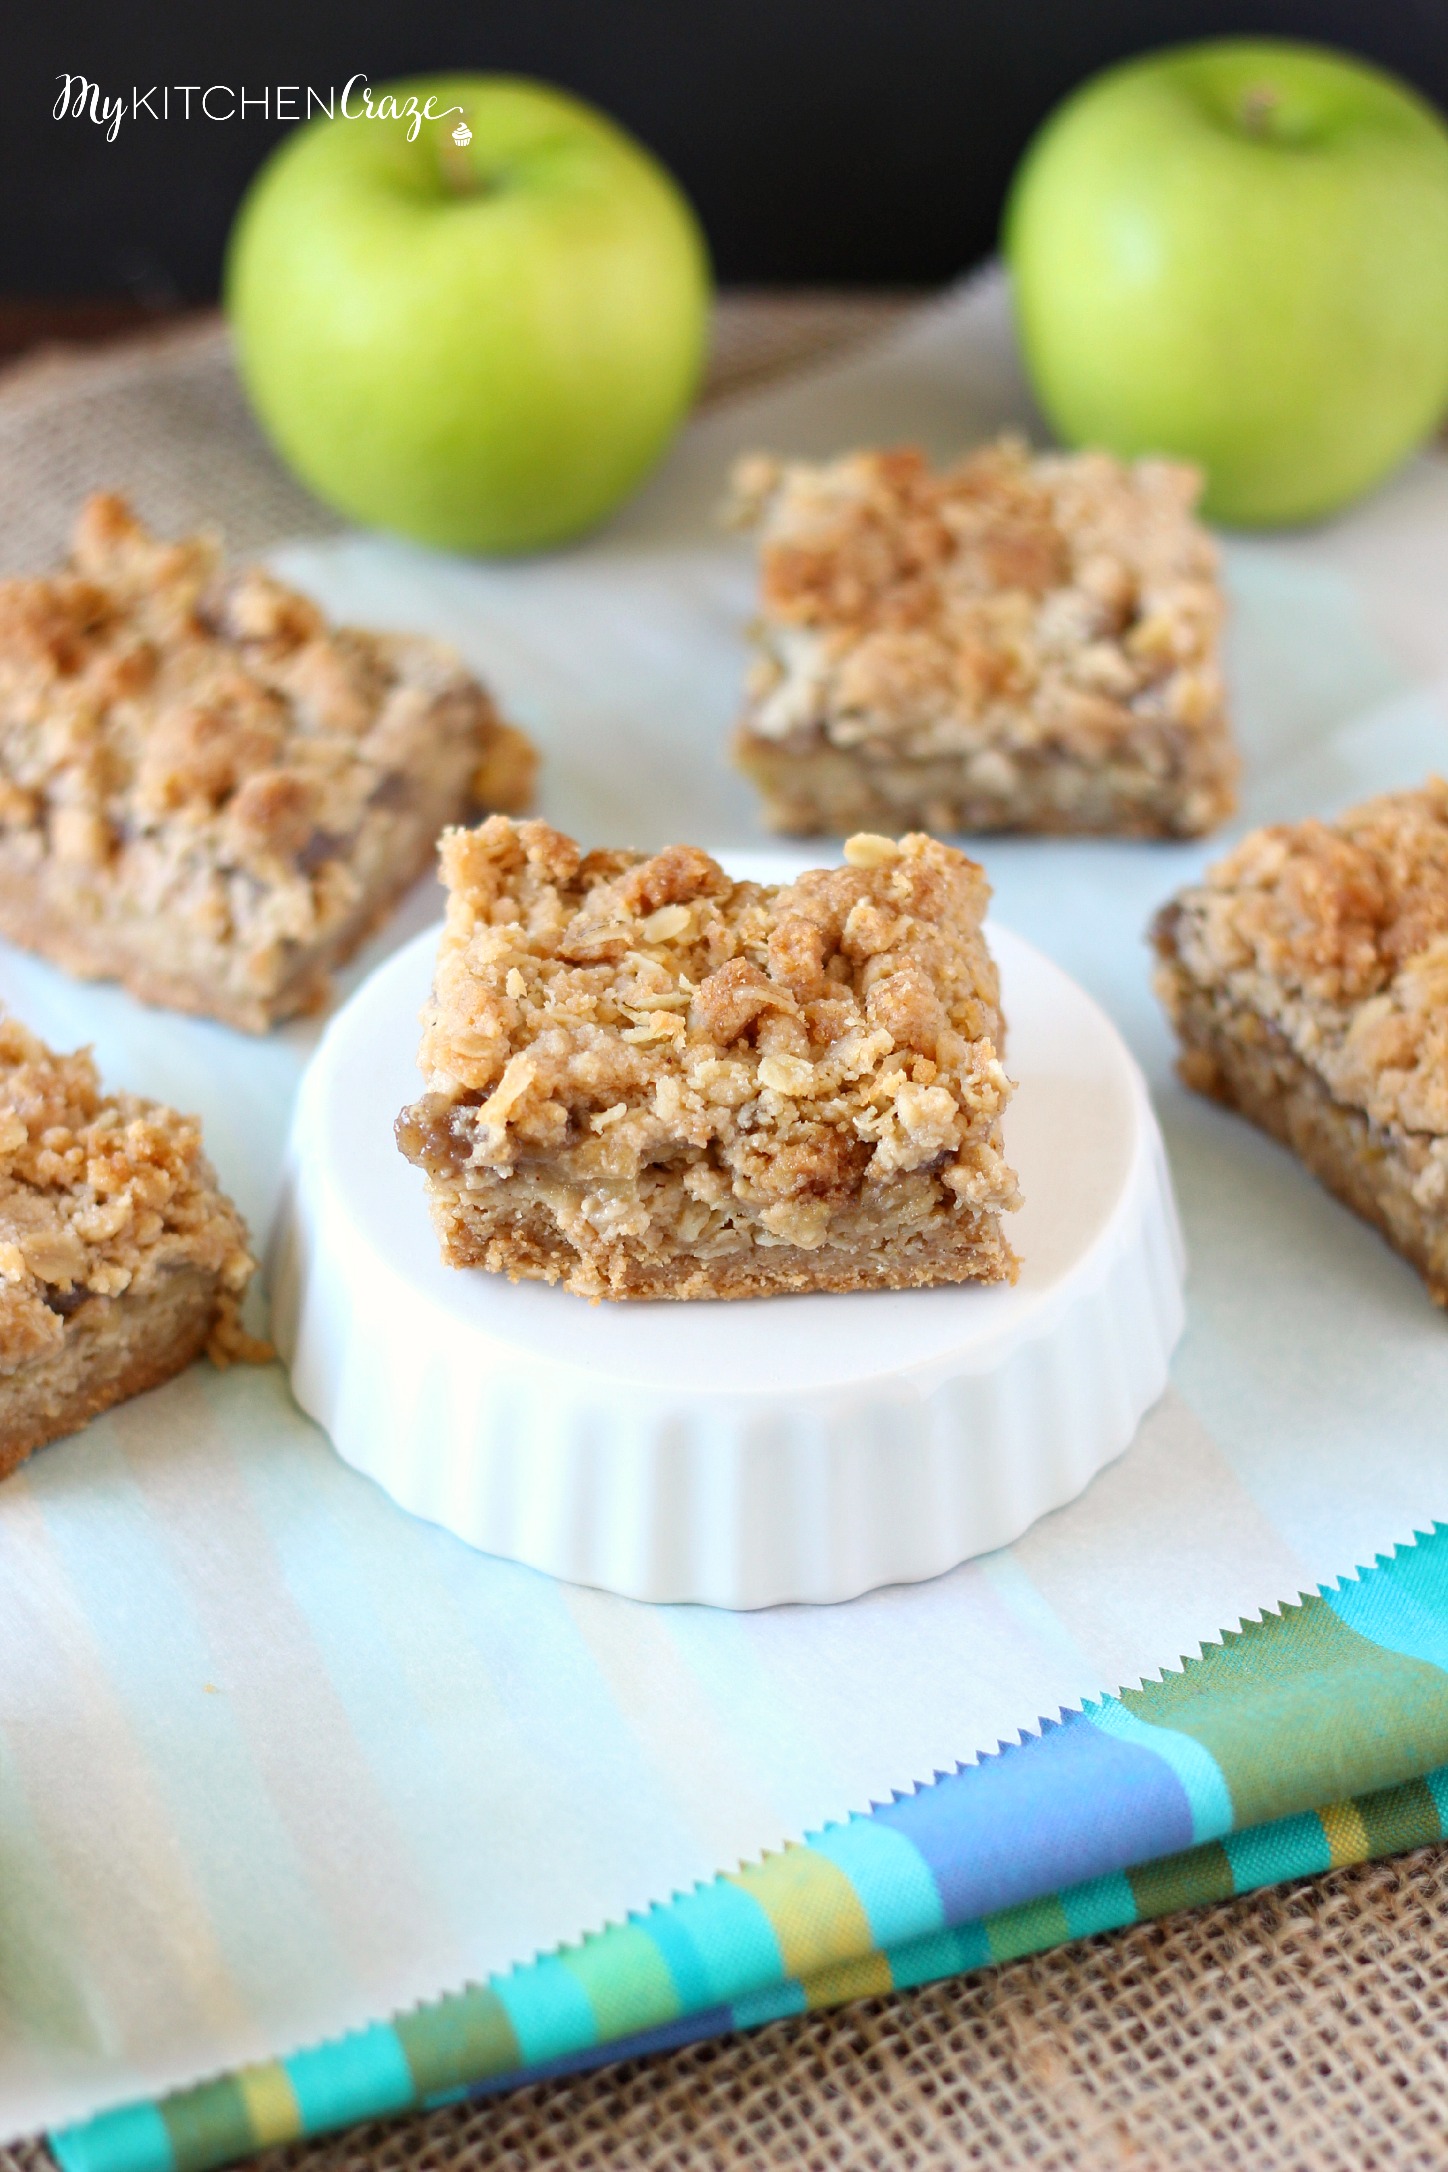 Caramel Apple Crumb Bars ~ mykitchencraze.com ~ These bars a easy to throw together and taste delicious!